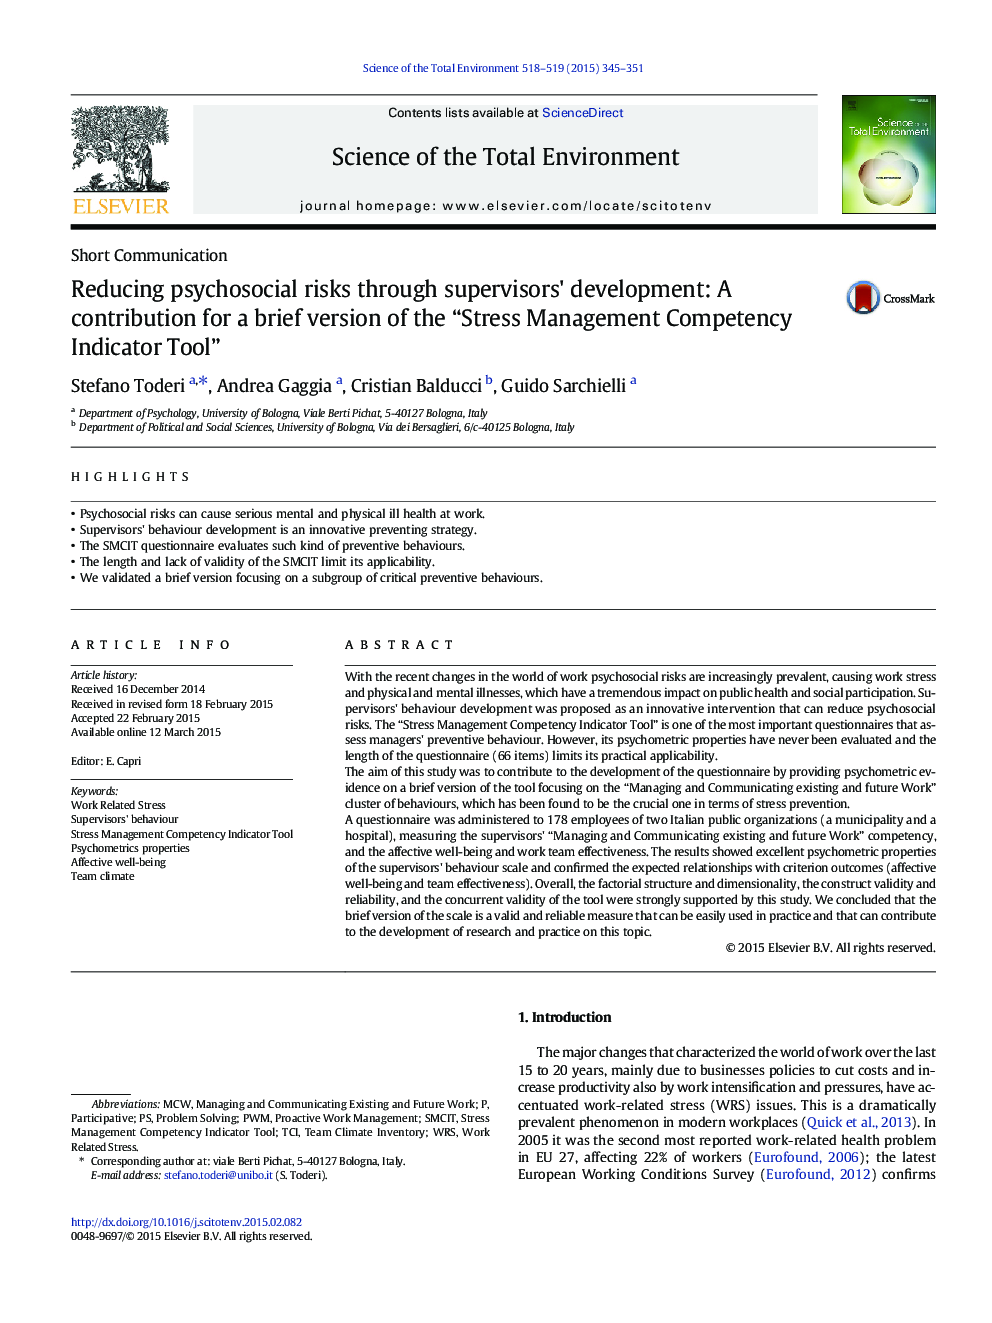 Reducing psychosocial risks through supervisors' development: A contribution for a brief version of the “Stress Management Competency Indicator Tool”